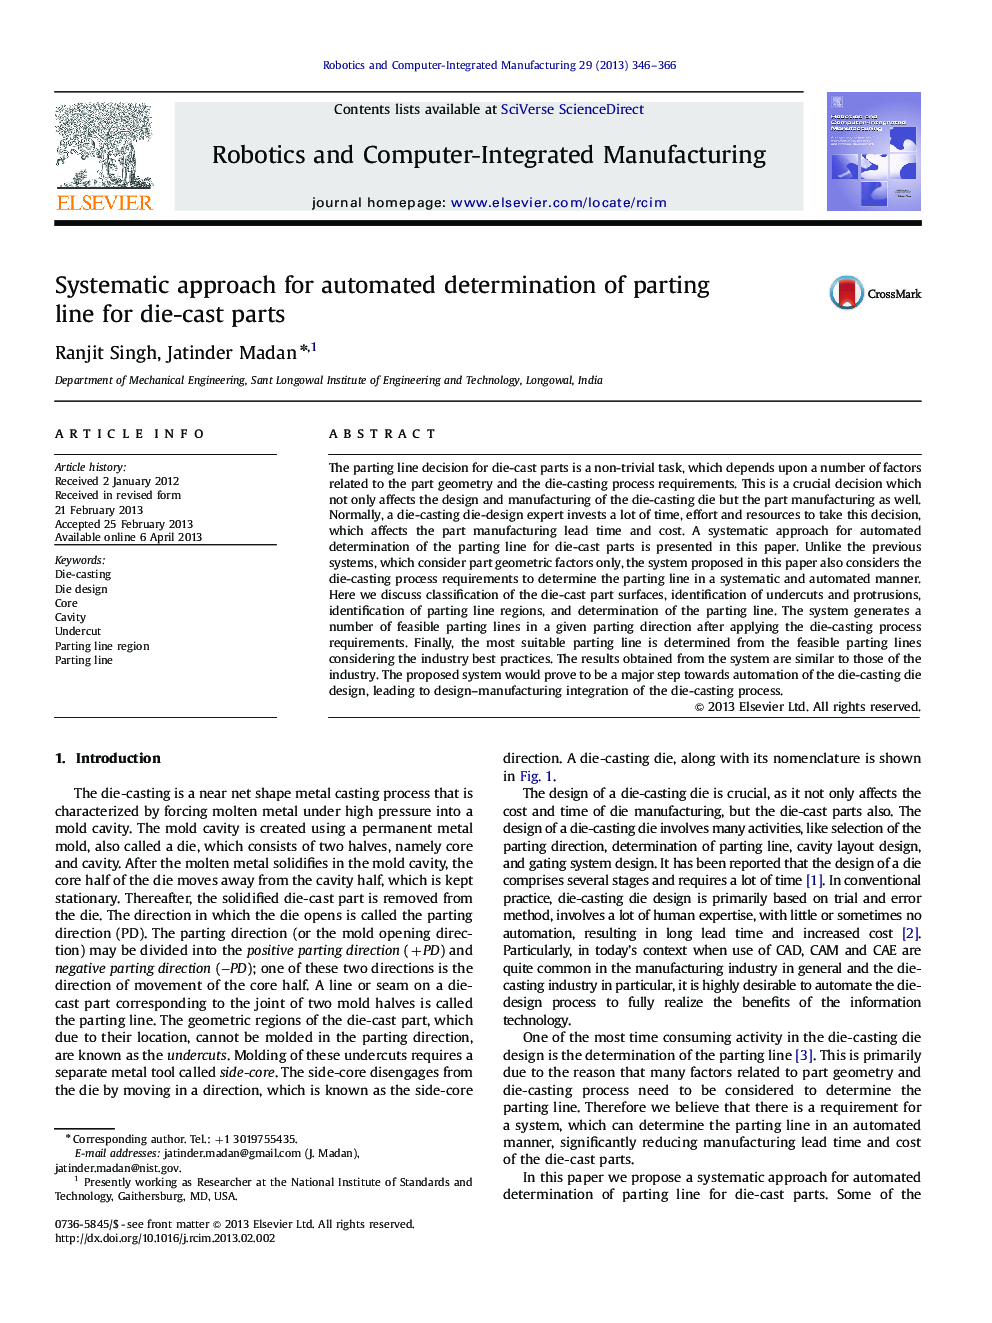 Systematic approach for automated determination of parting line for die-cast parts